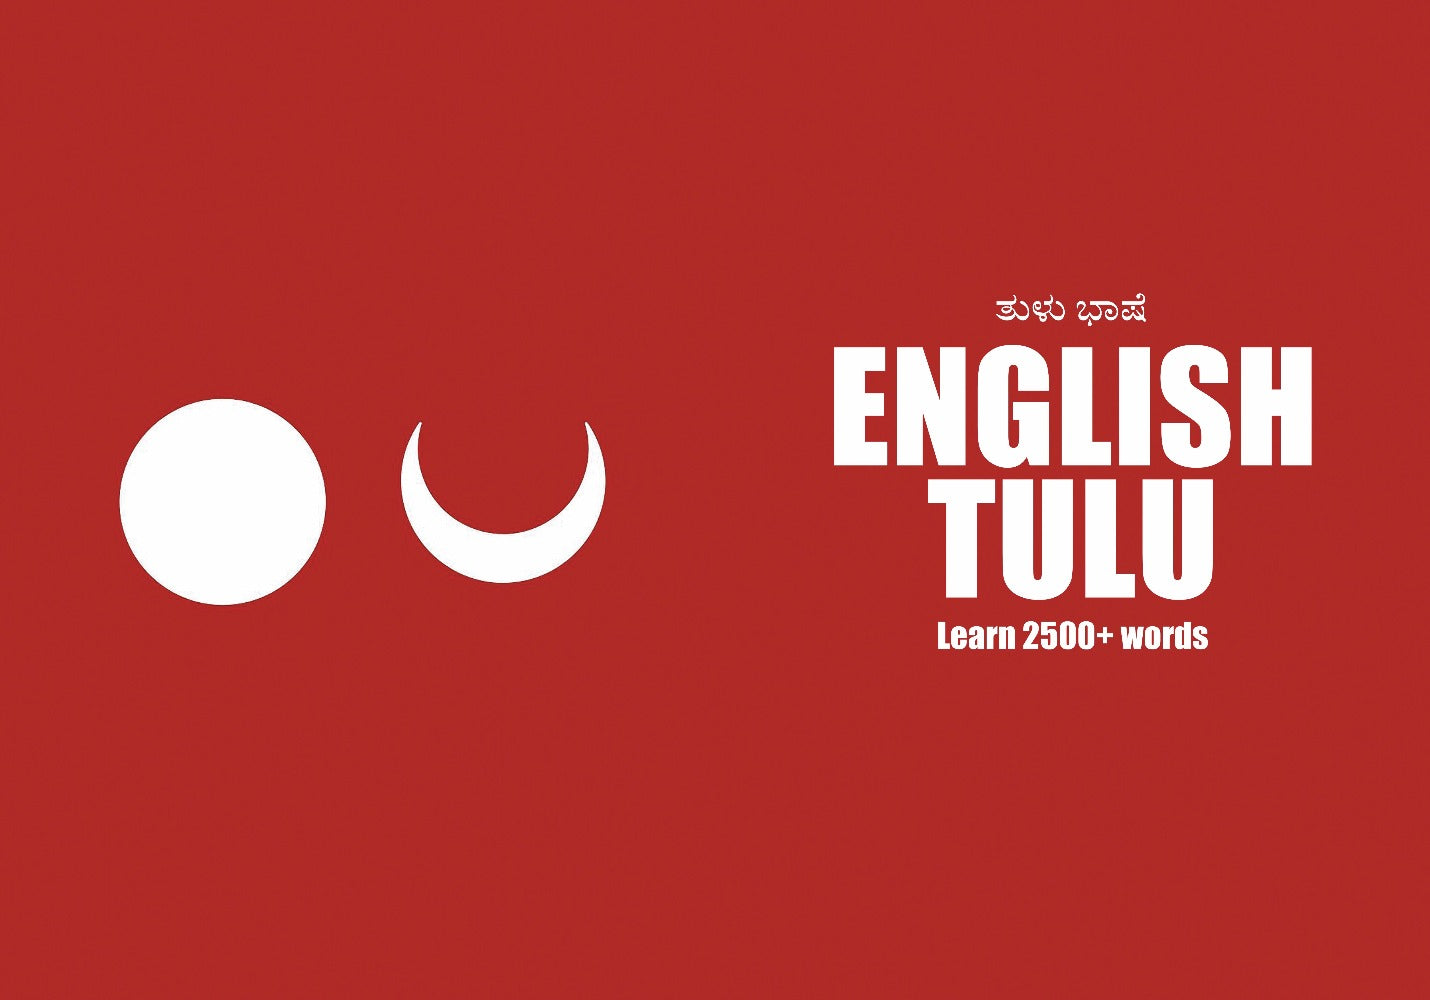 Tulu language learning notebook cover